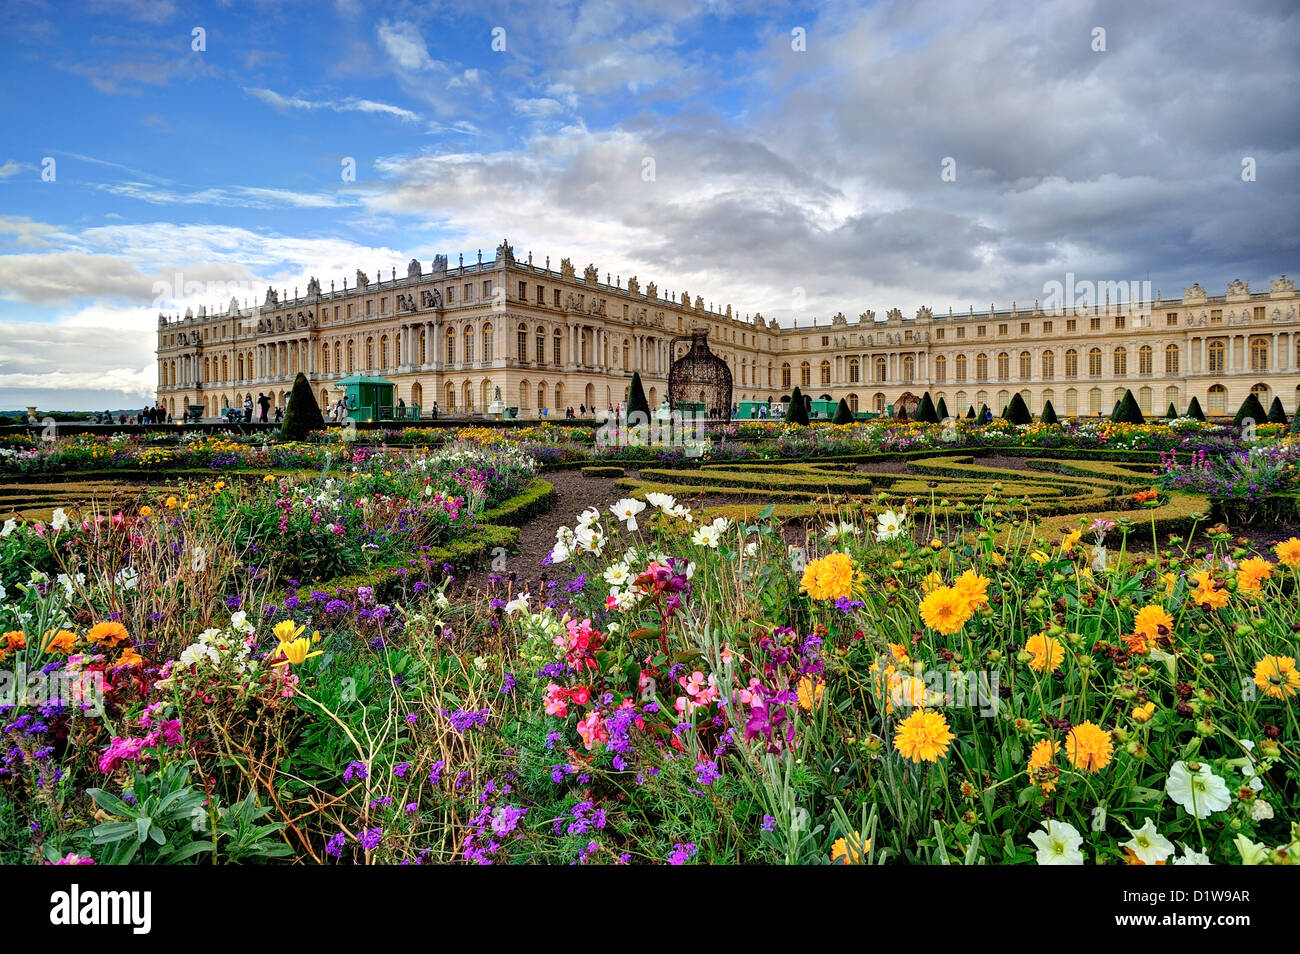 The Palace of Versailles Stock Photo